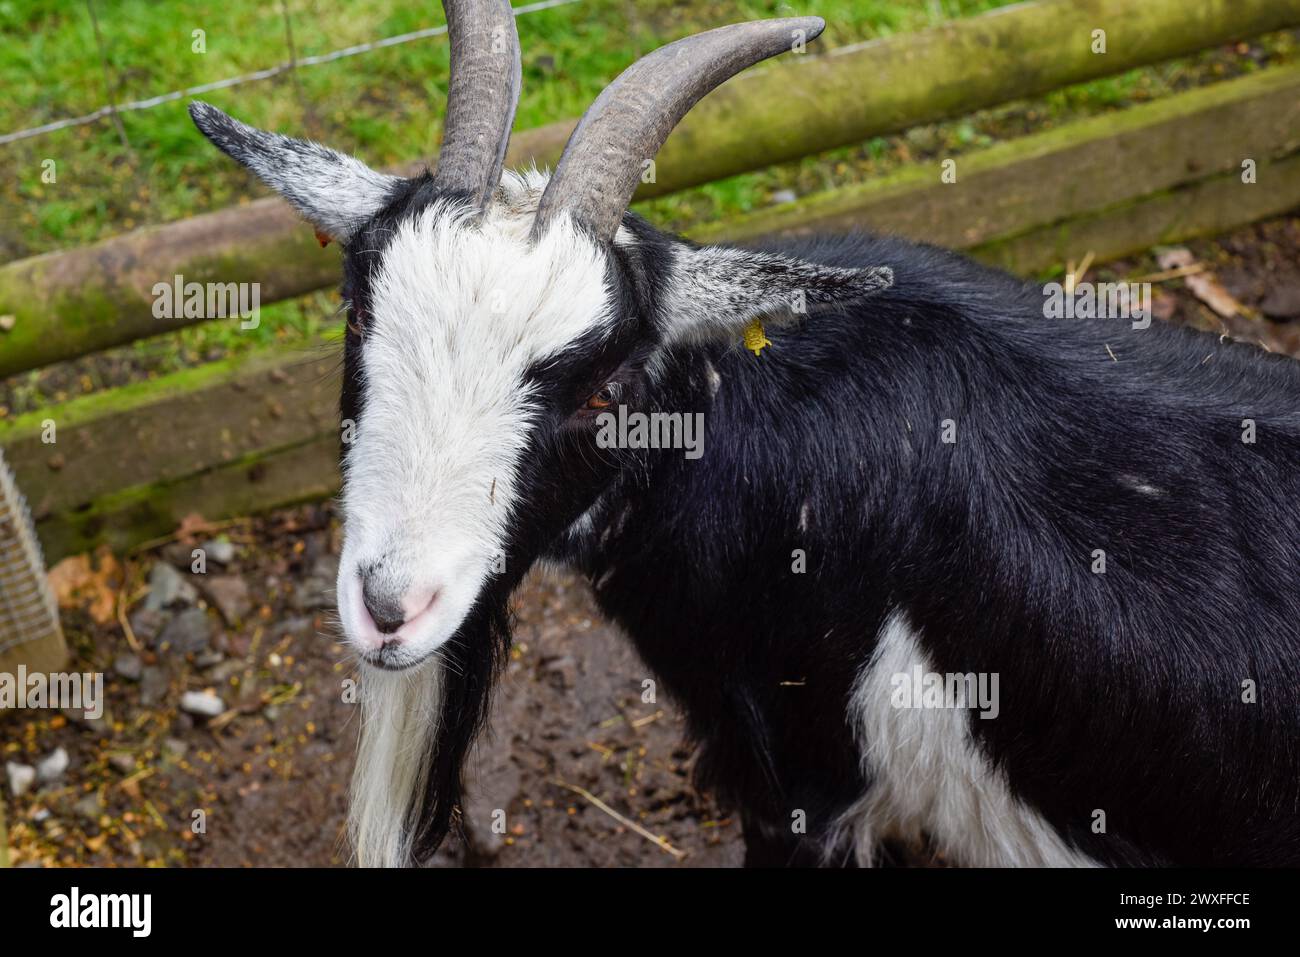 Young black and white haired billy goat with horns and a beard Stock Photo